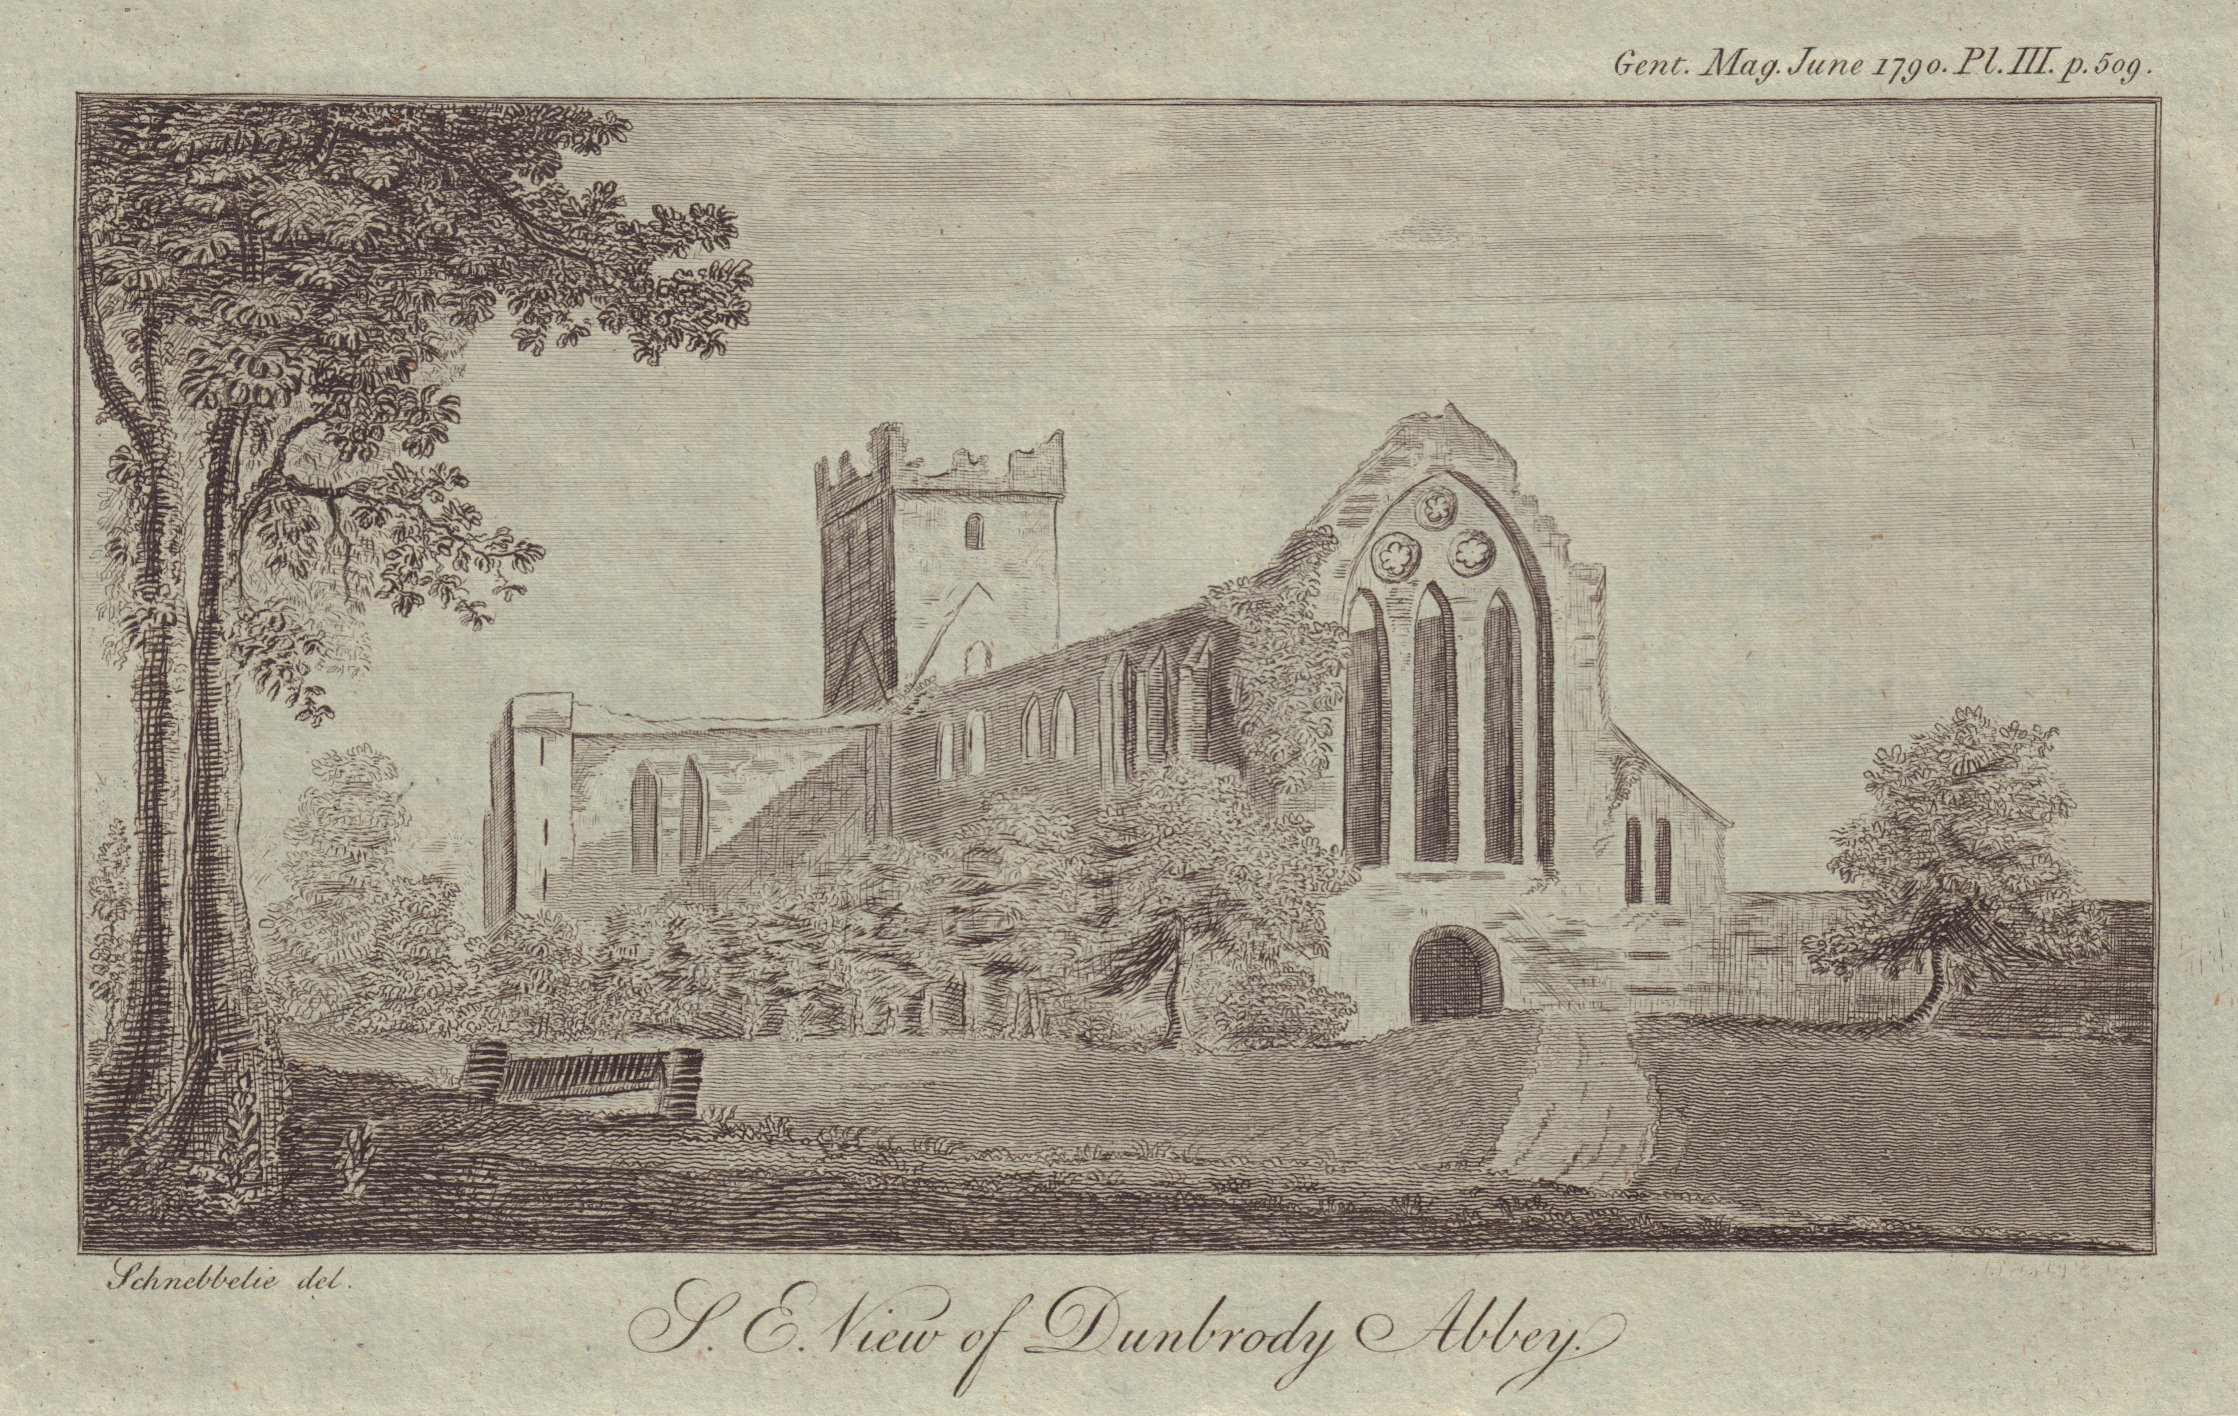 Associate Product S. E. View of Dunbrody Abbey[in Wexford, Ireland. GENTS MAG 1790 old print